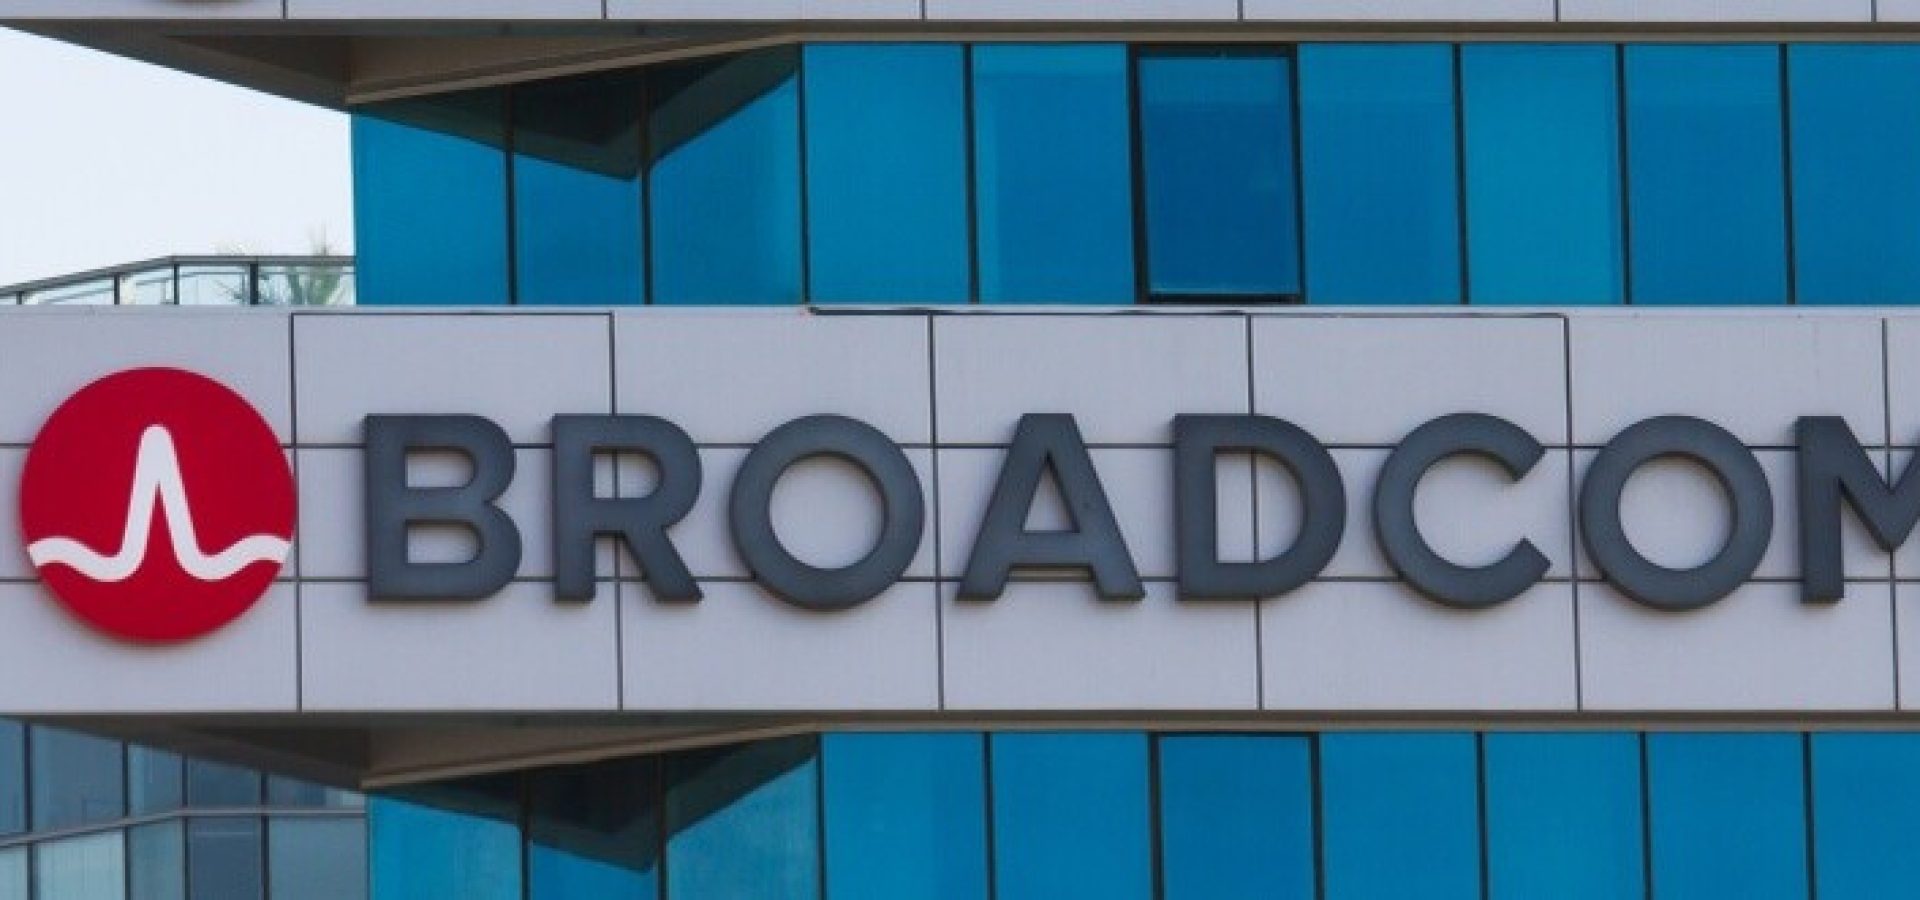 — Antitrust Laws: Broadcom name in their office.